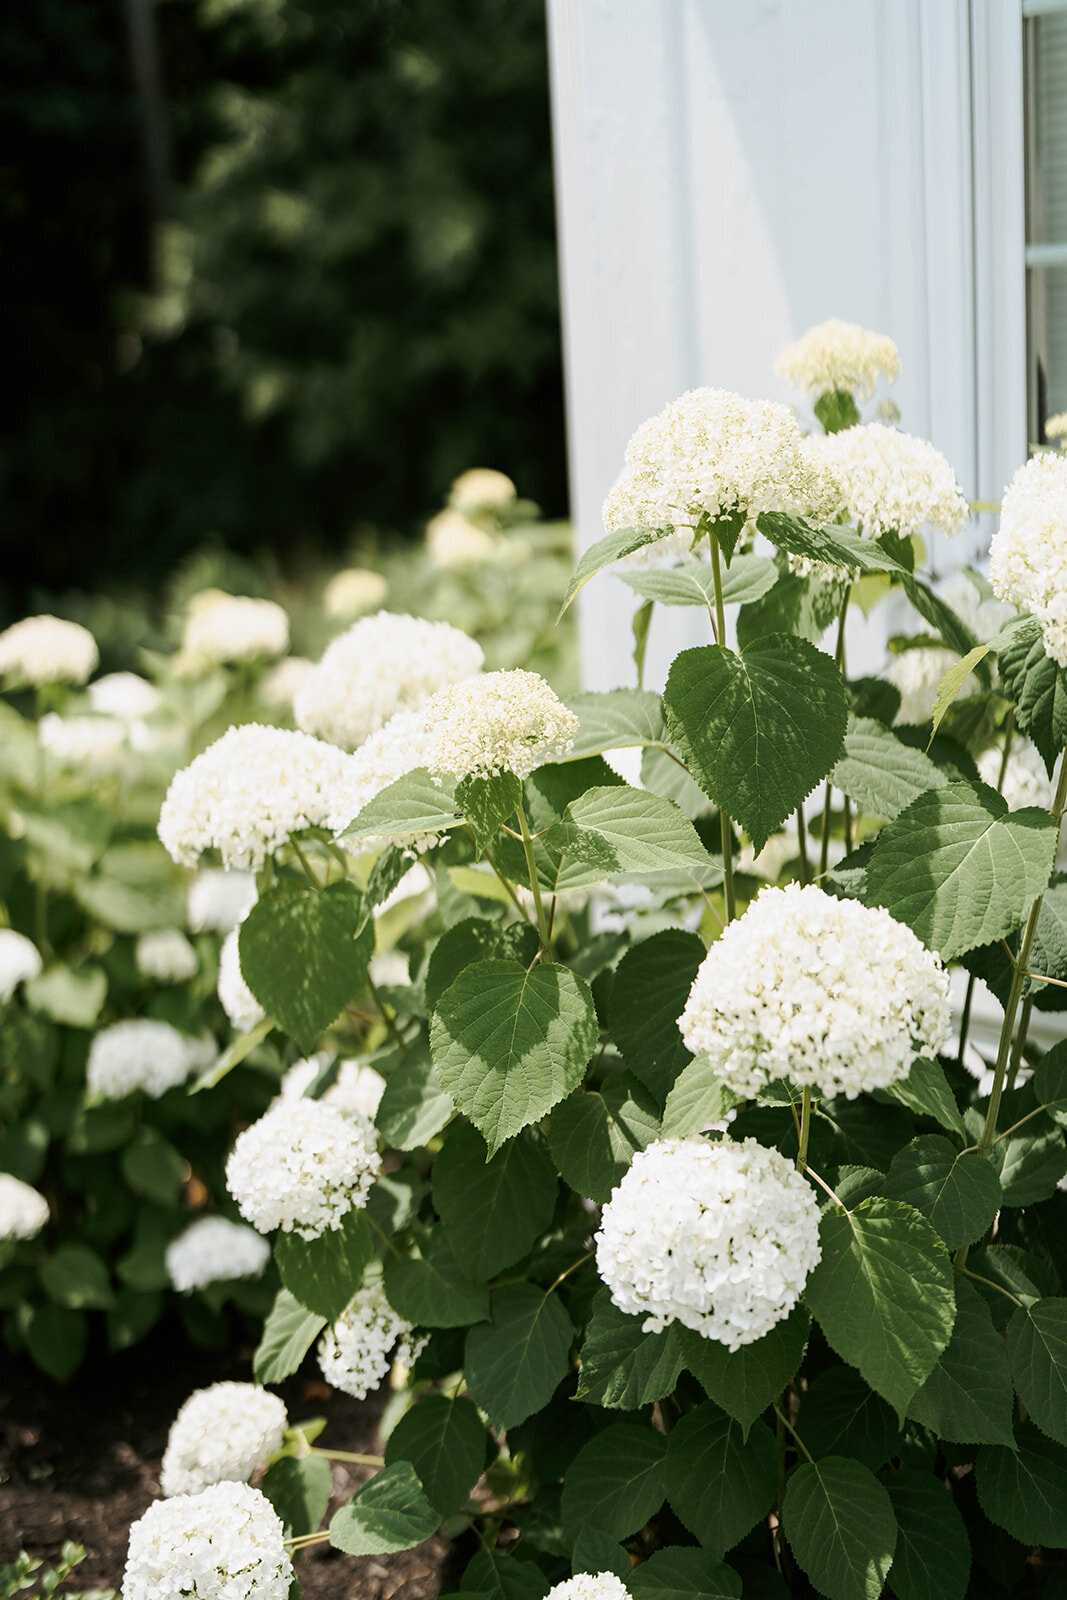 white hydrangeas in full bloom with vibrant green foliage